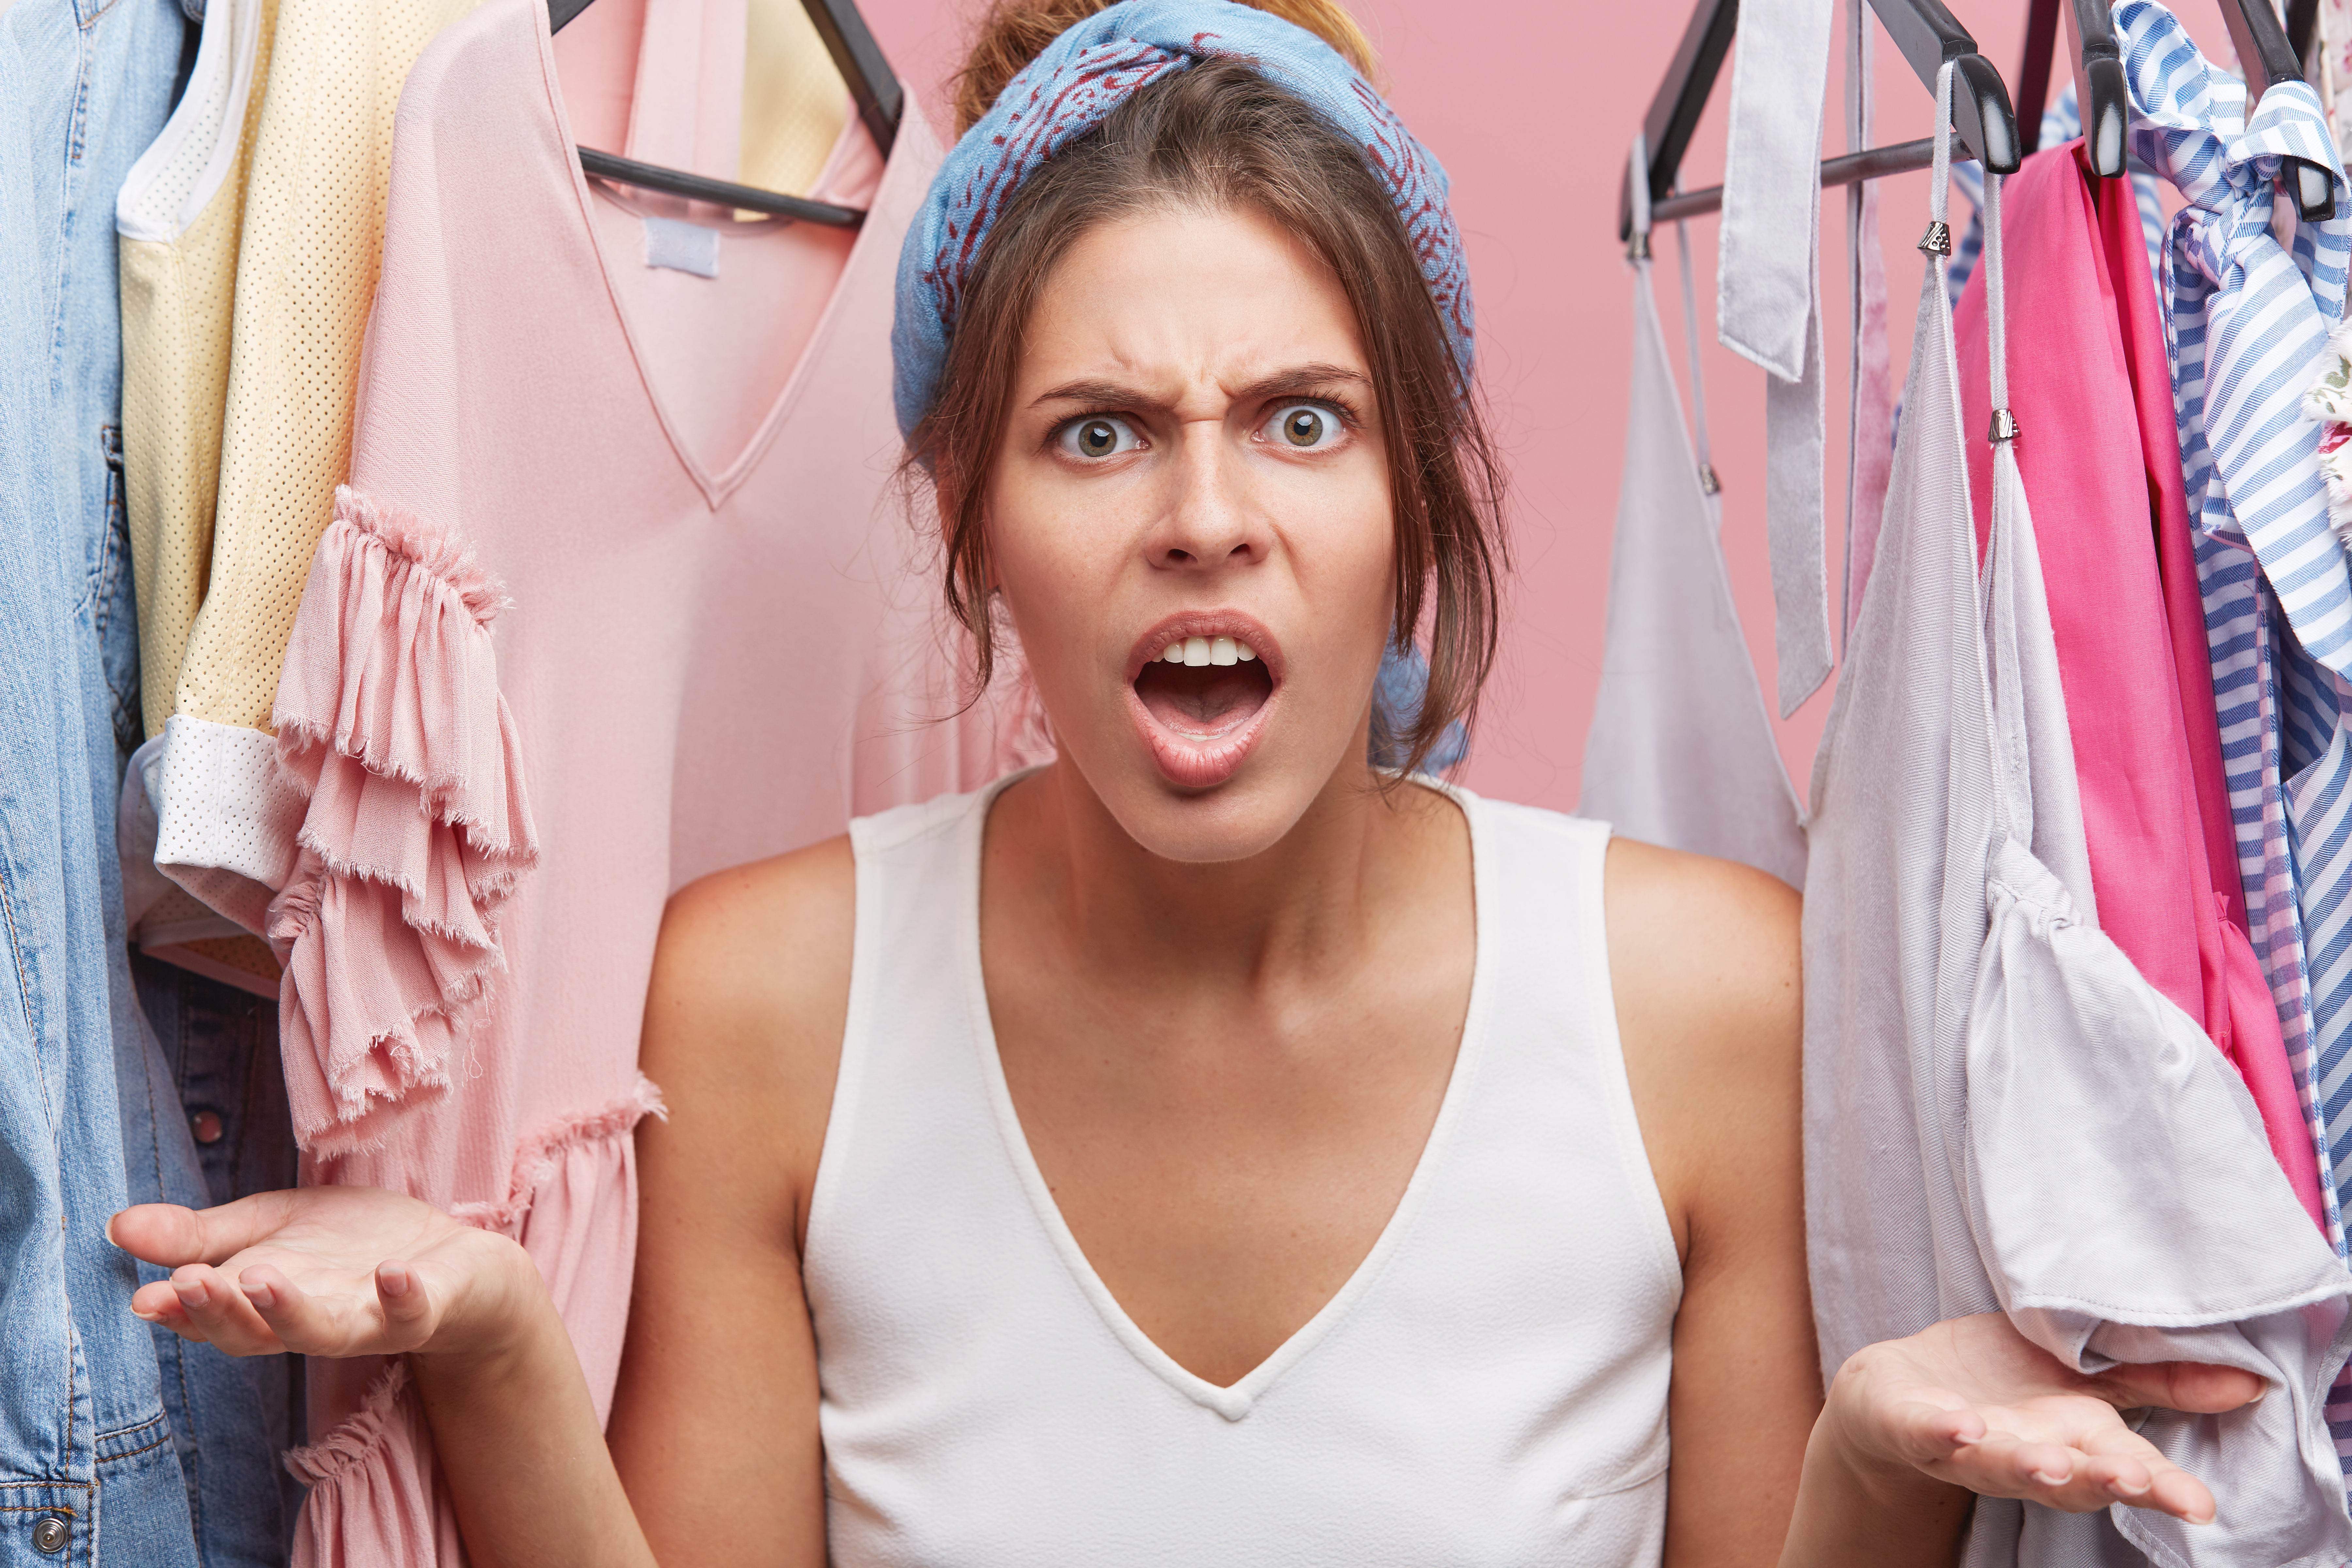 Woman furious as she stands in the midst of clothing | Source: wayhomestudio on Freepik